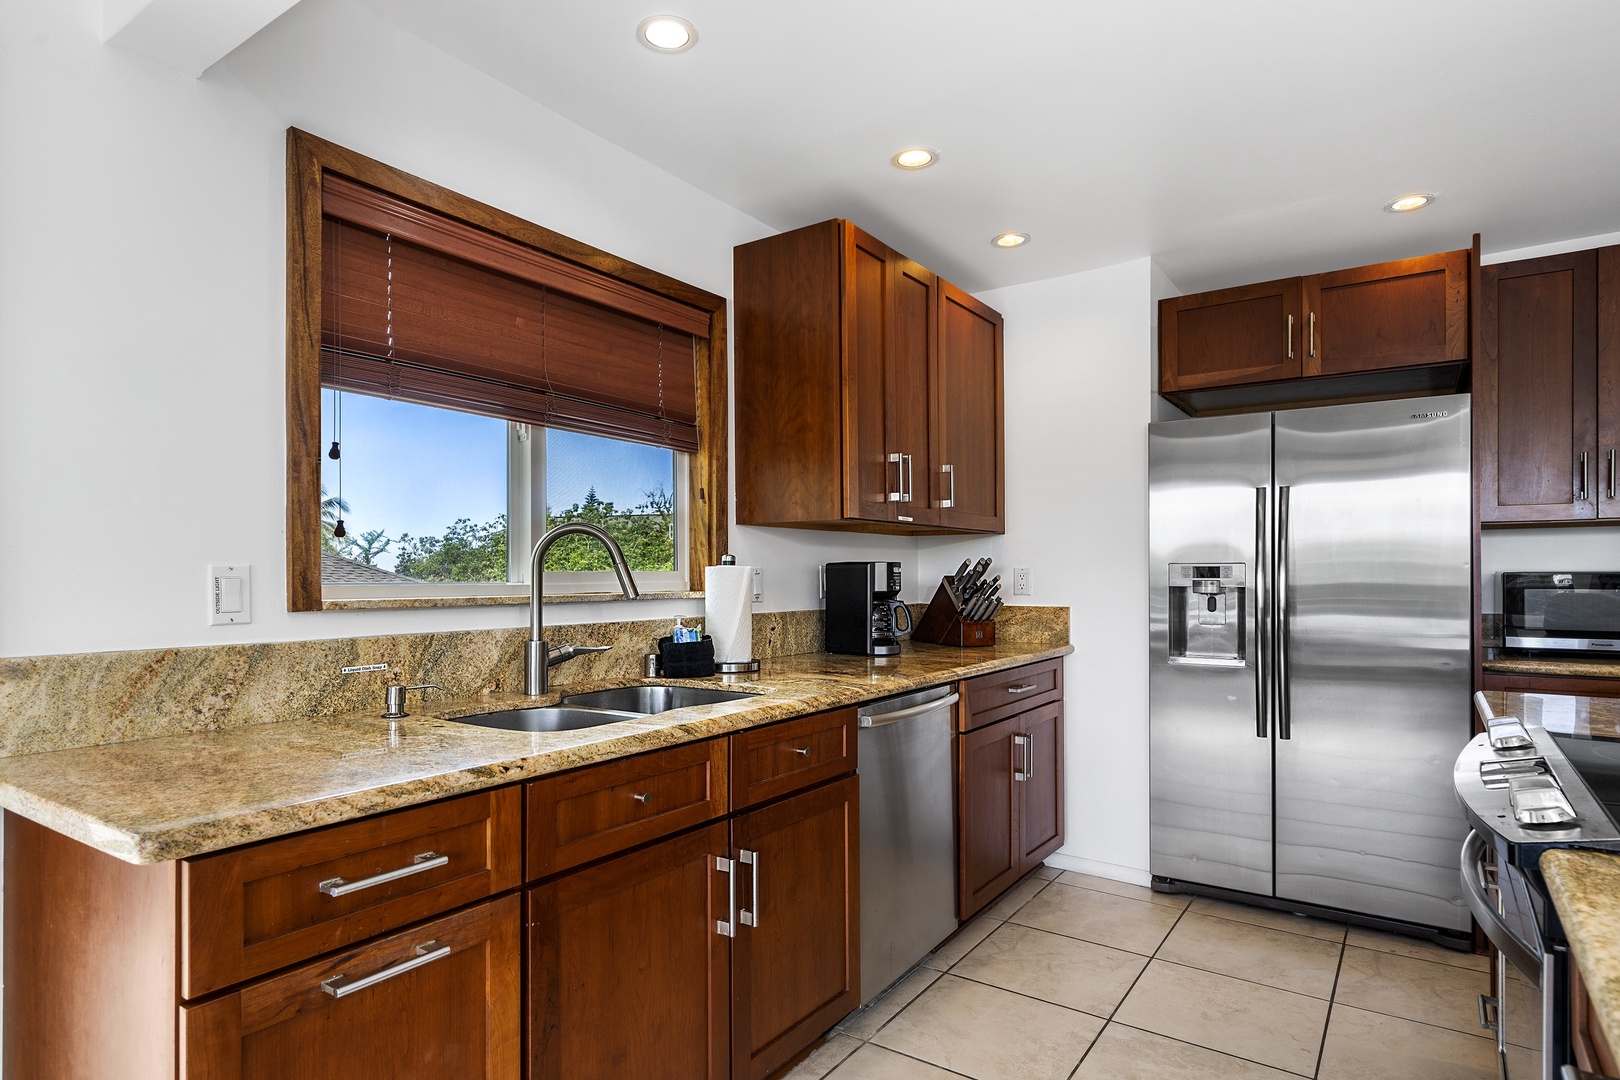 Kailua Kona Vacation Rentals, Kona's Shangri La - Third floor fully equipped kitchen with stainless appliances